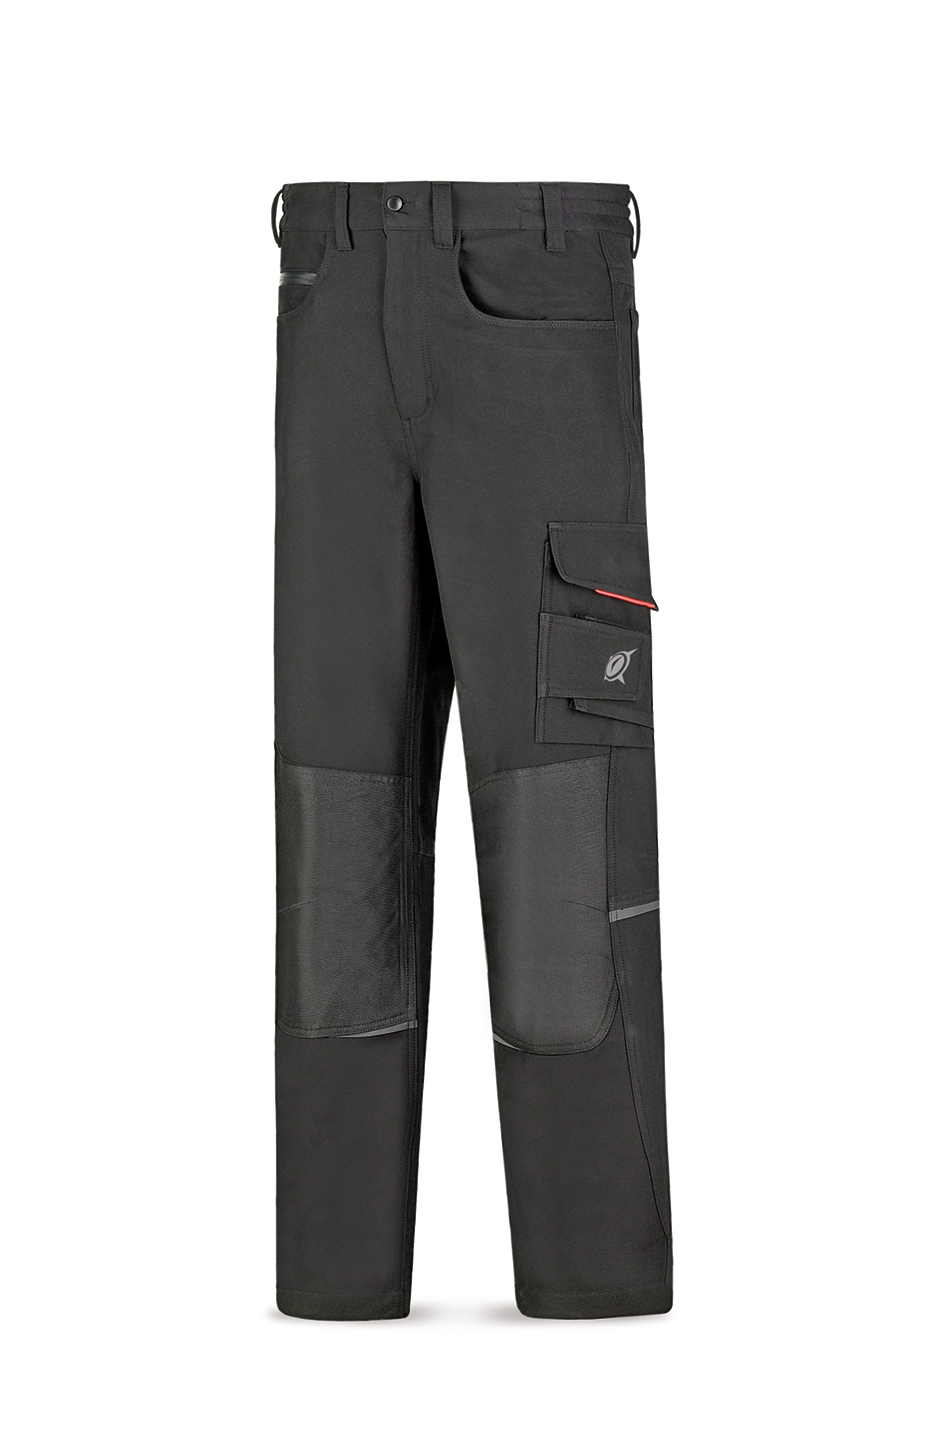 288-PAS3 Coats and Rain Gear  Pants Triple layers Softshell trousers model NJORD.